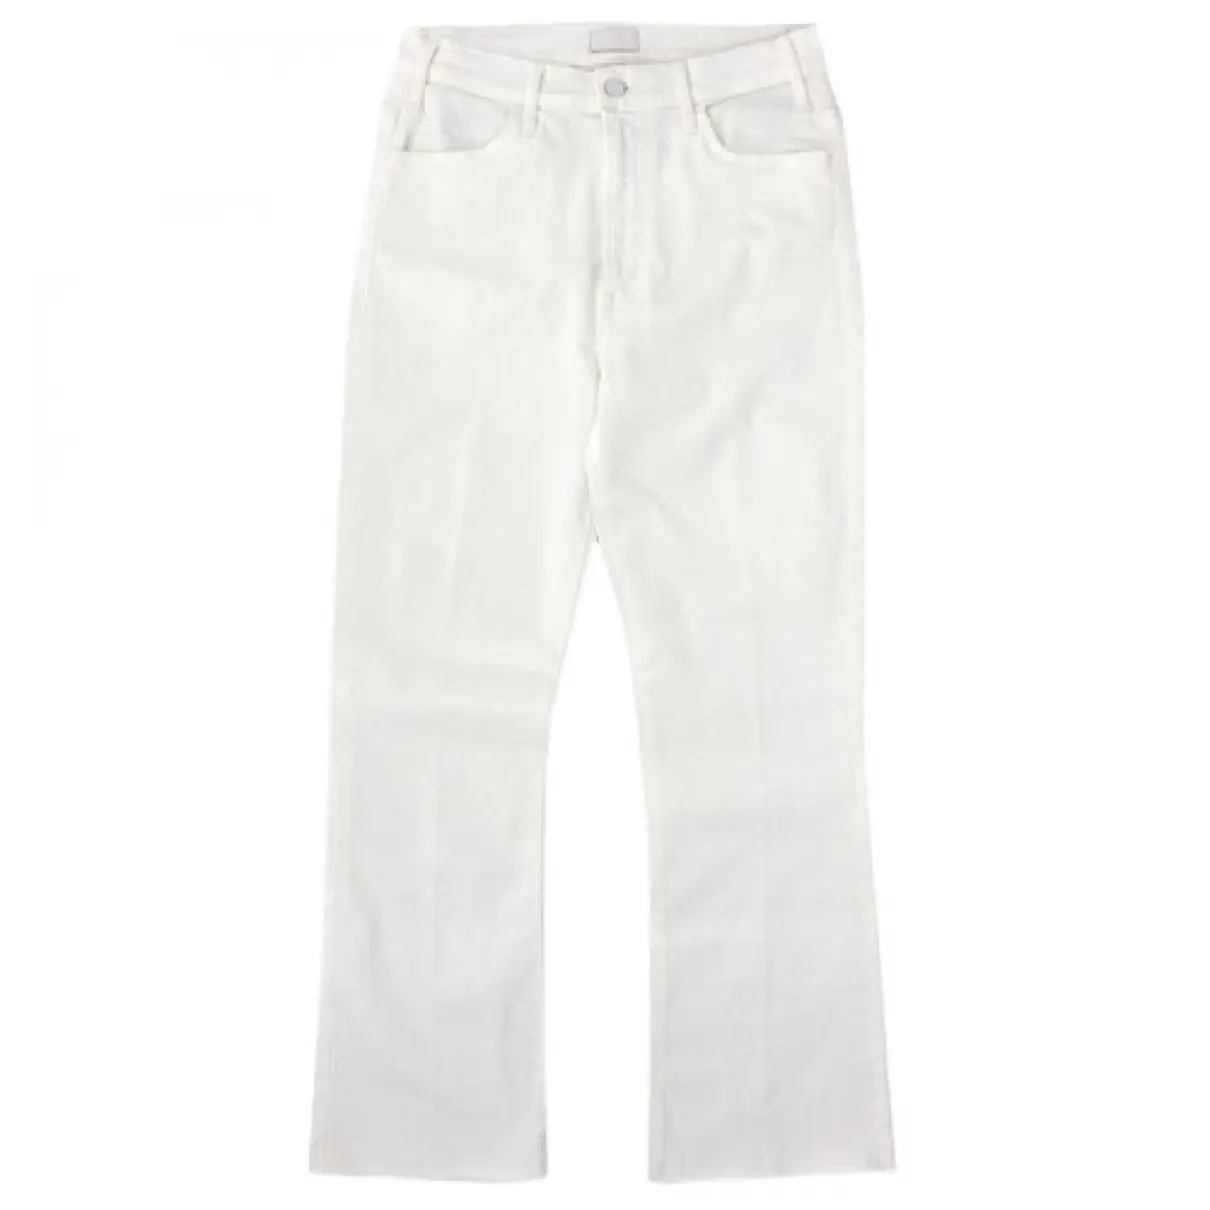 White Cotton Jeans Mother